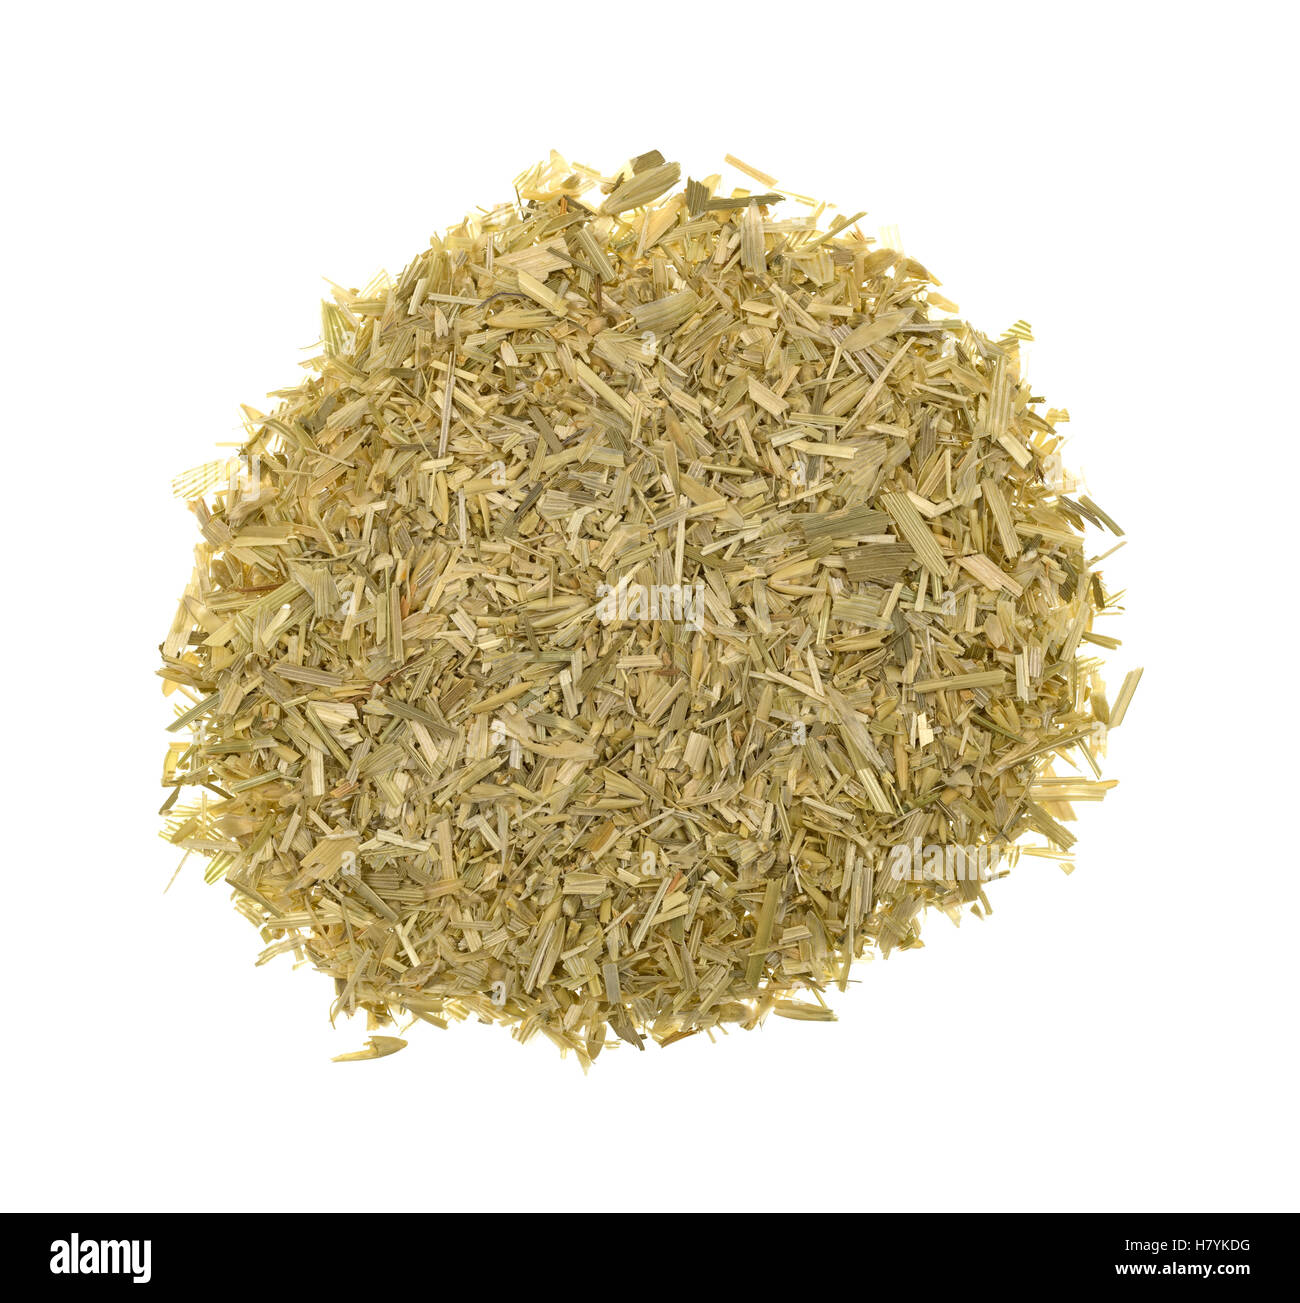 Top view of a small pile of oatstraw herb isolated on a white background. Stock Photo